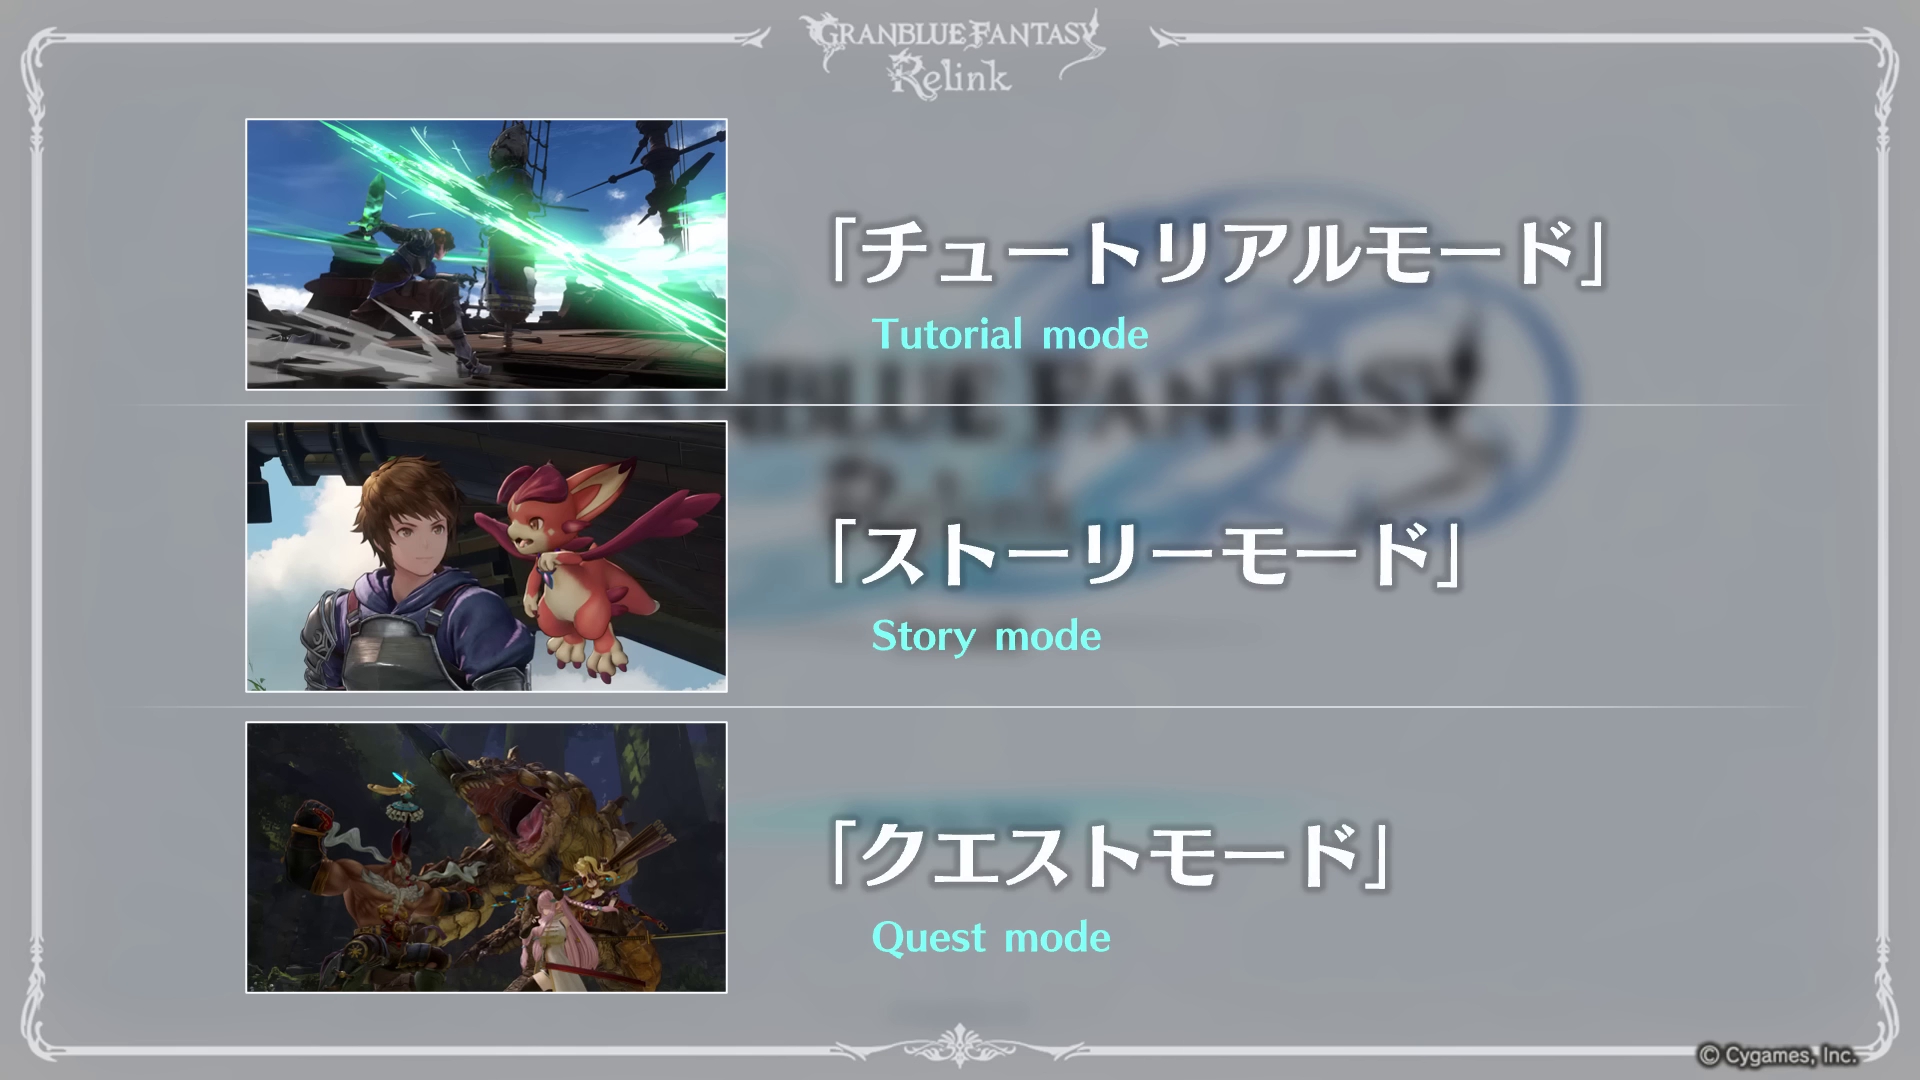 Granblue Fantasy: Relink finally coming out for PS4/PS5/PC in 2022 : r/PS5